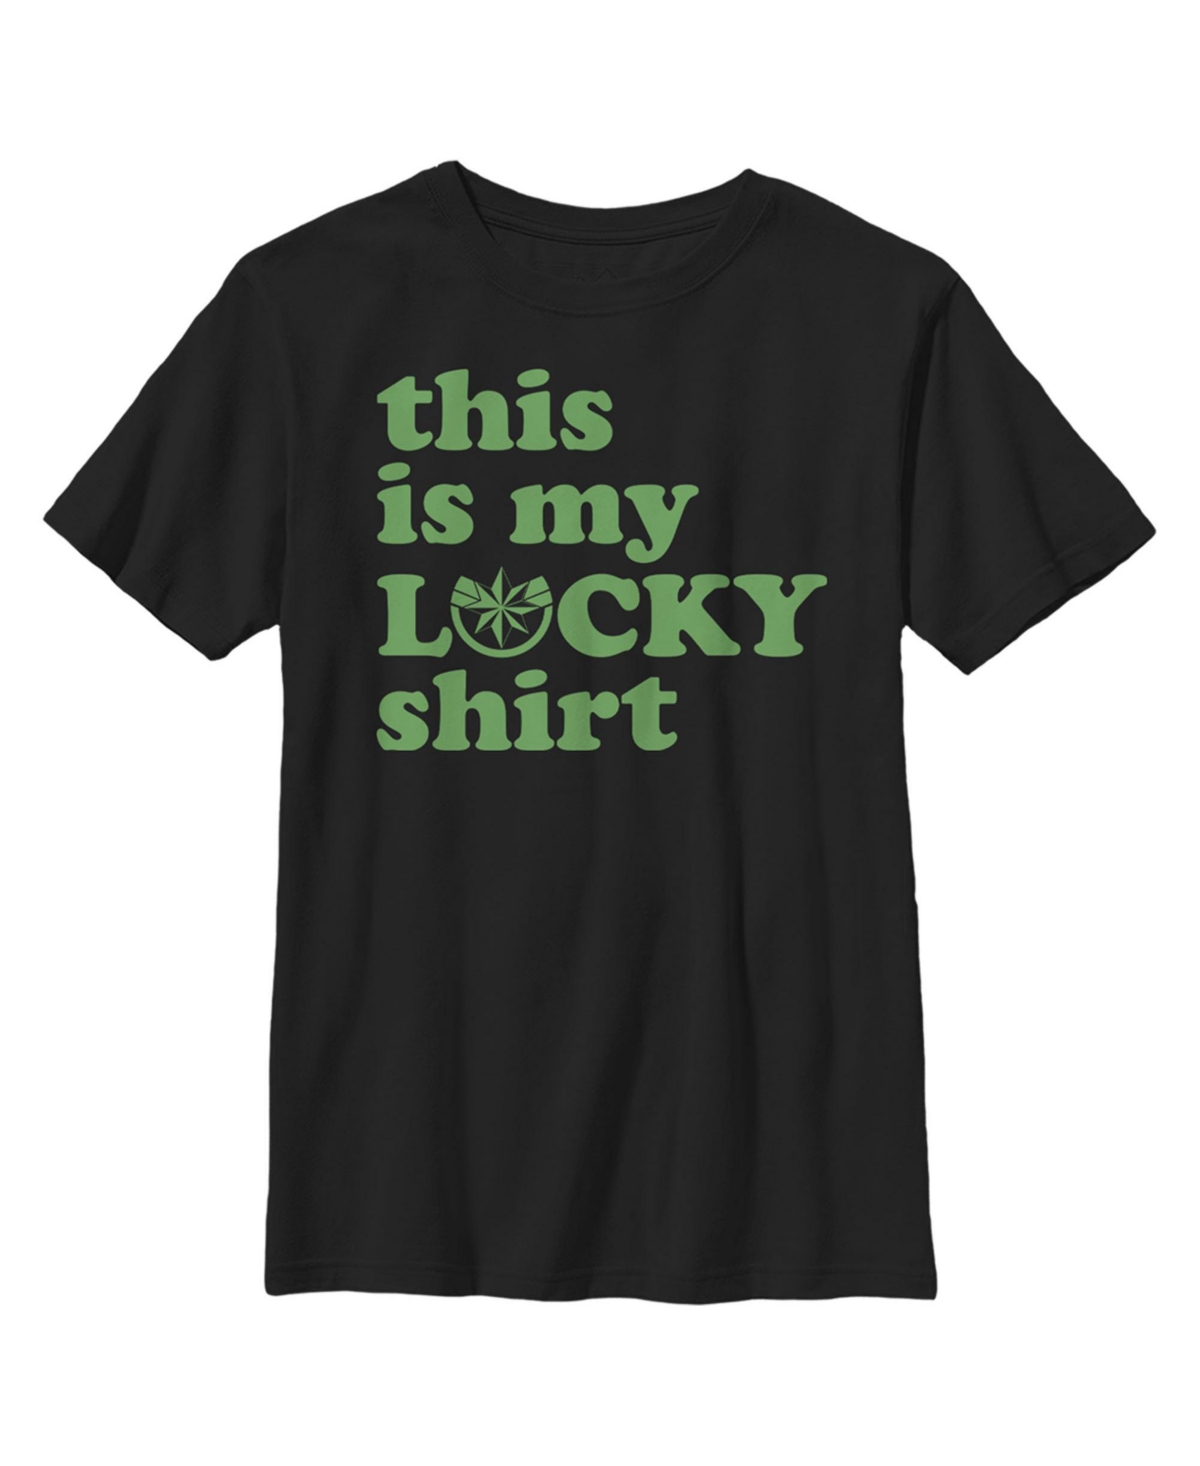 Boy's Marvel Captain Marvel St. Patrick's Day This Is My lucky Shirt Child T-Shirt - Black